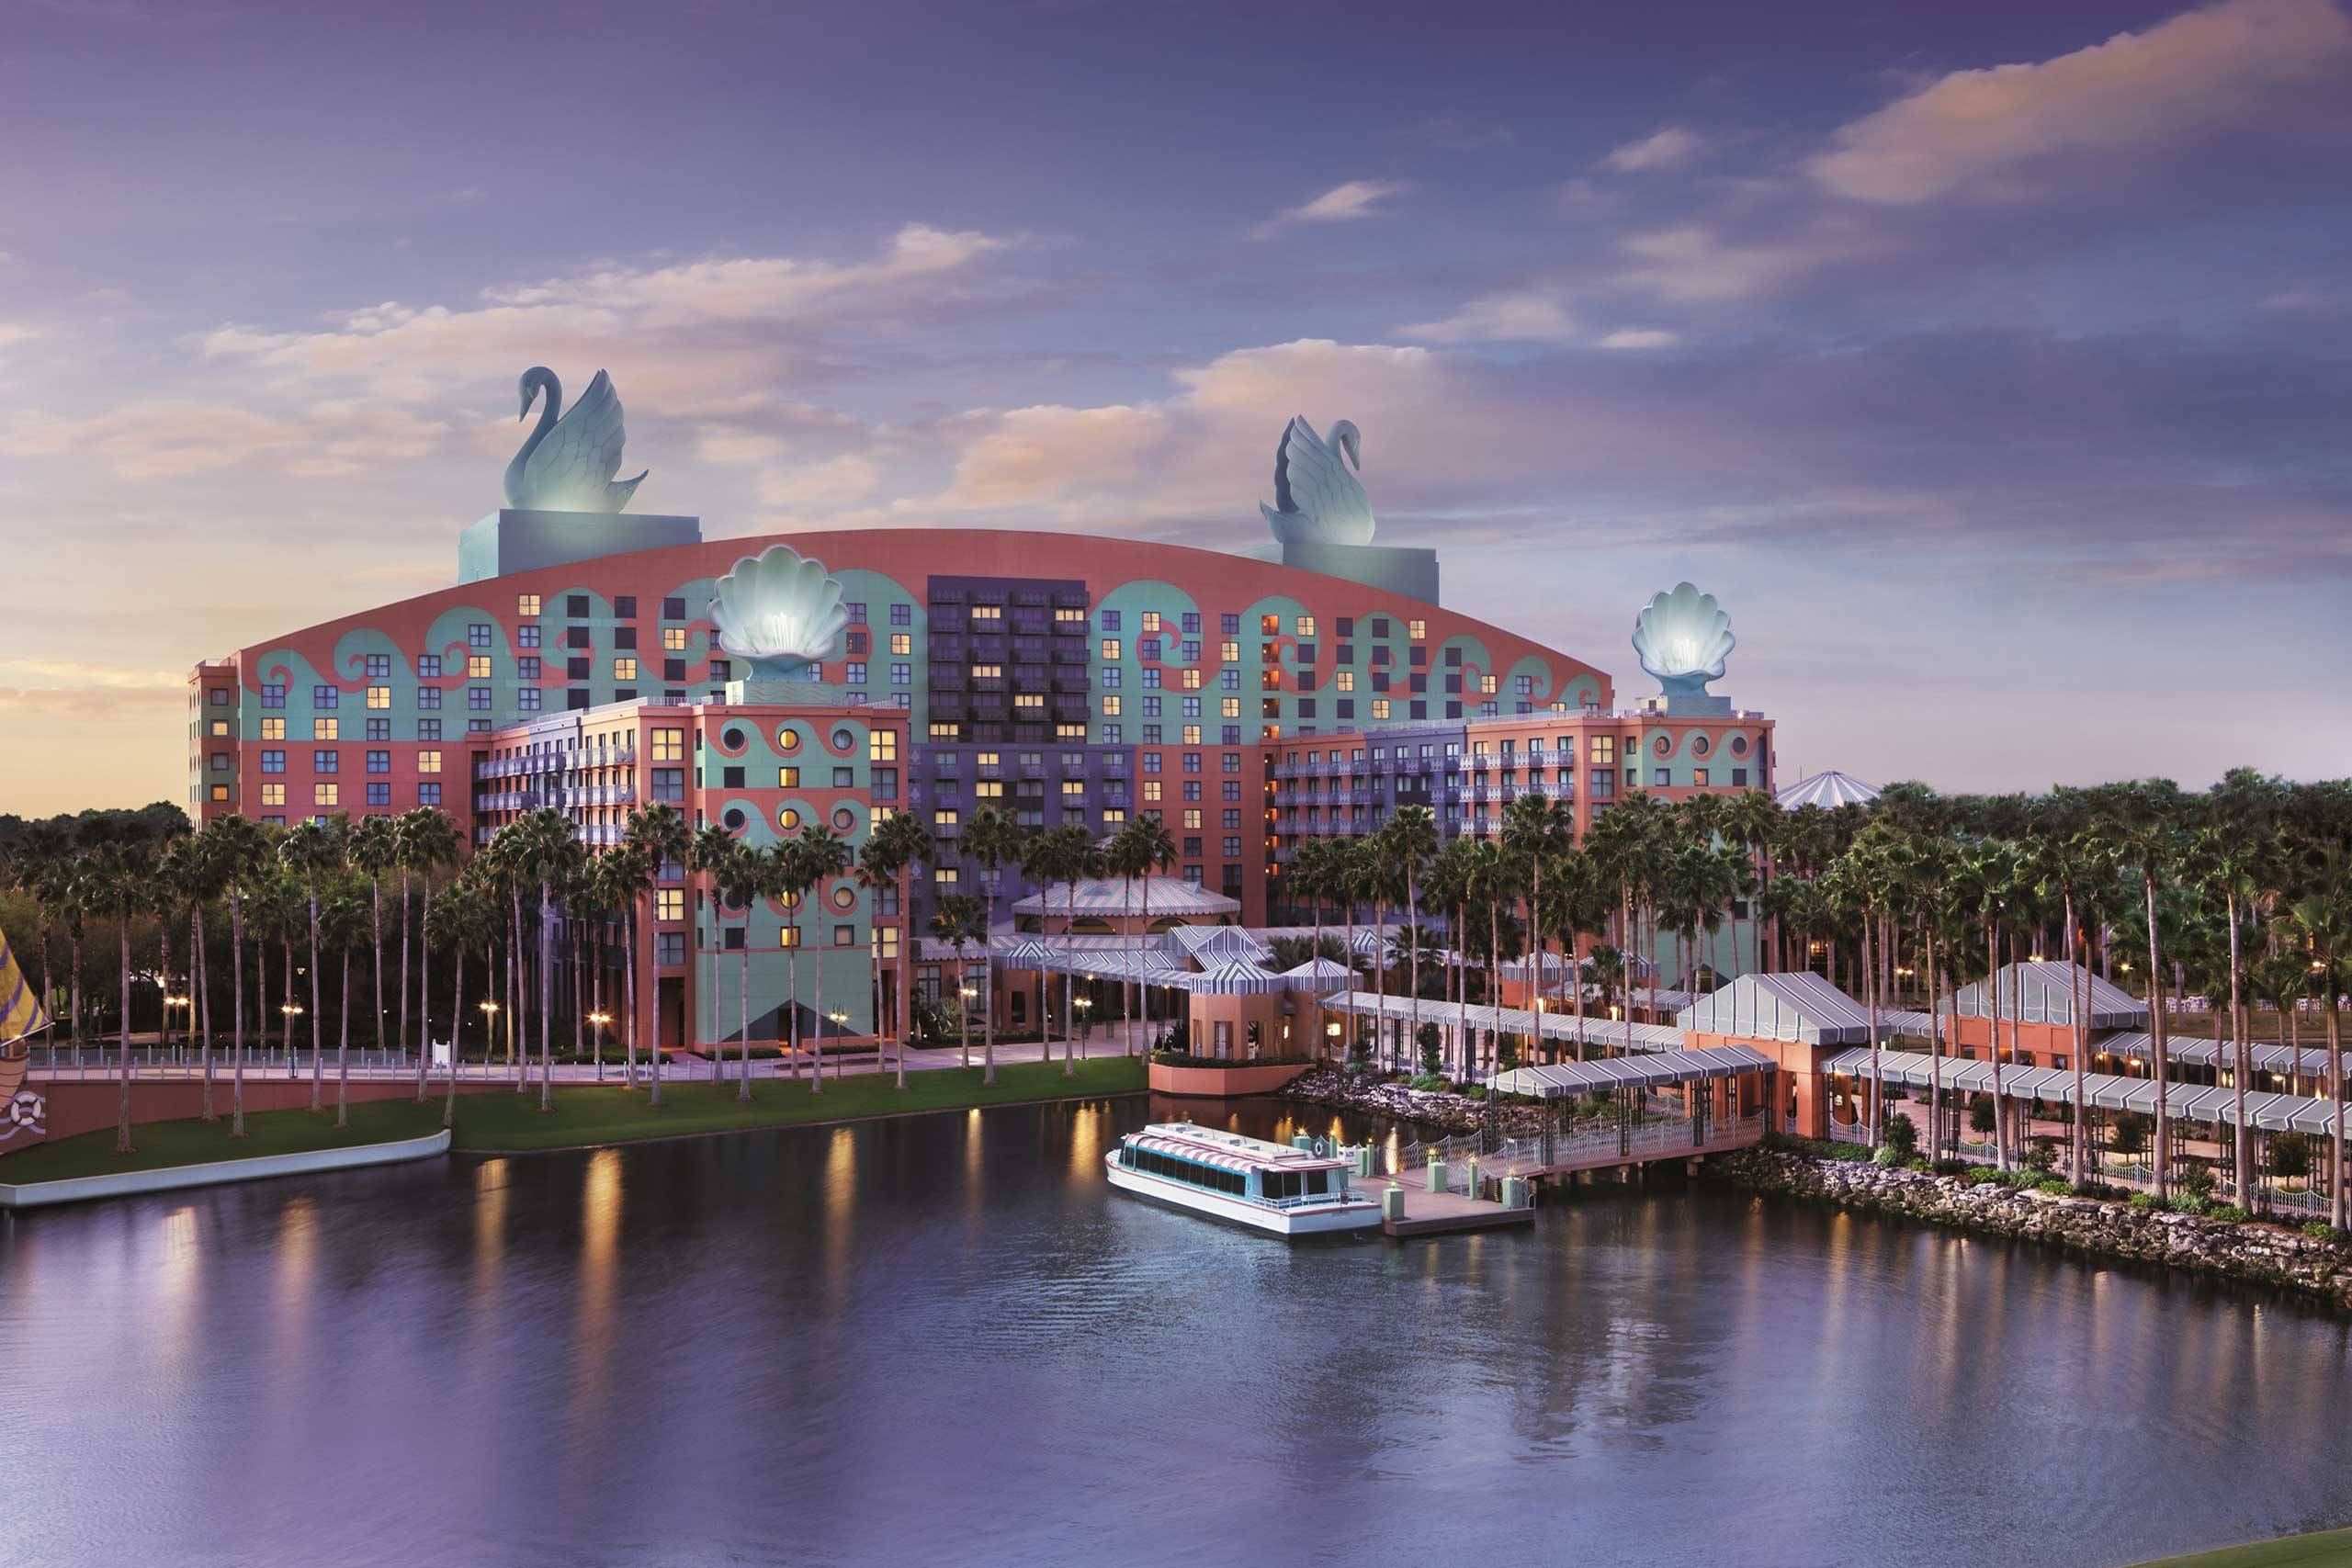 Guests of Walt Disney World Swan and Dolphin - including the new Walt Disney World Swan Reserve will be able to participate in Early and Extended Theme Park Entry